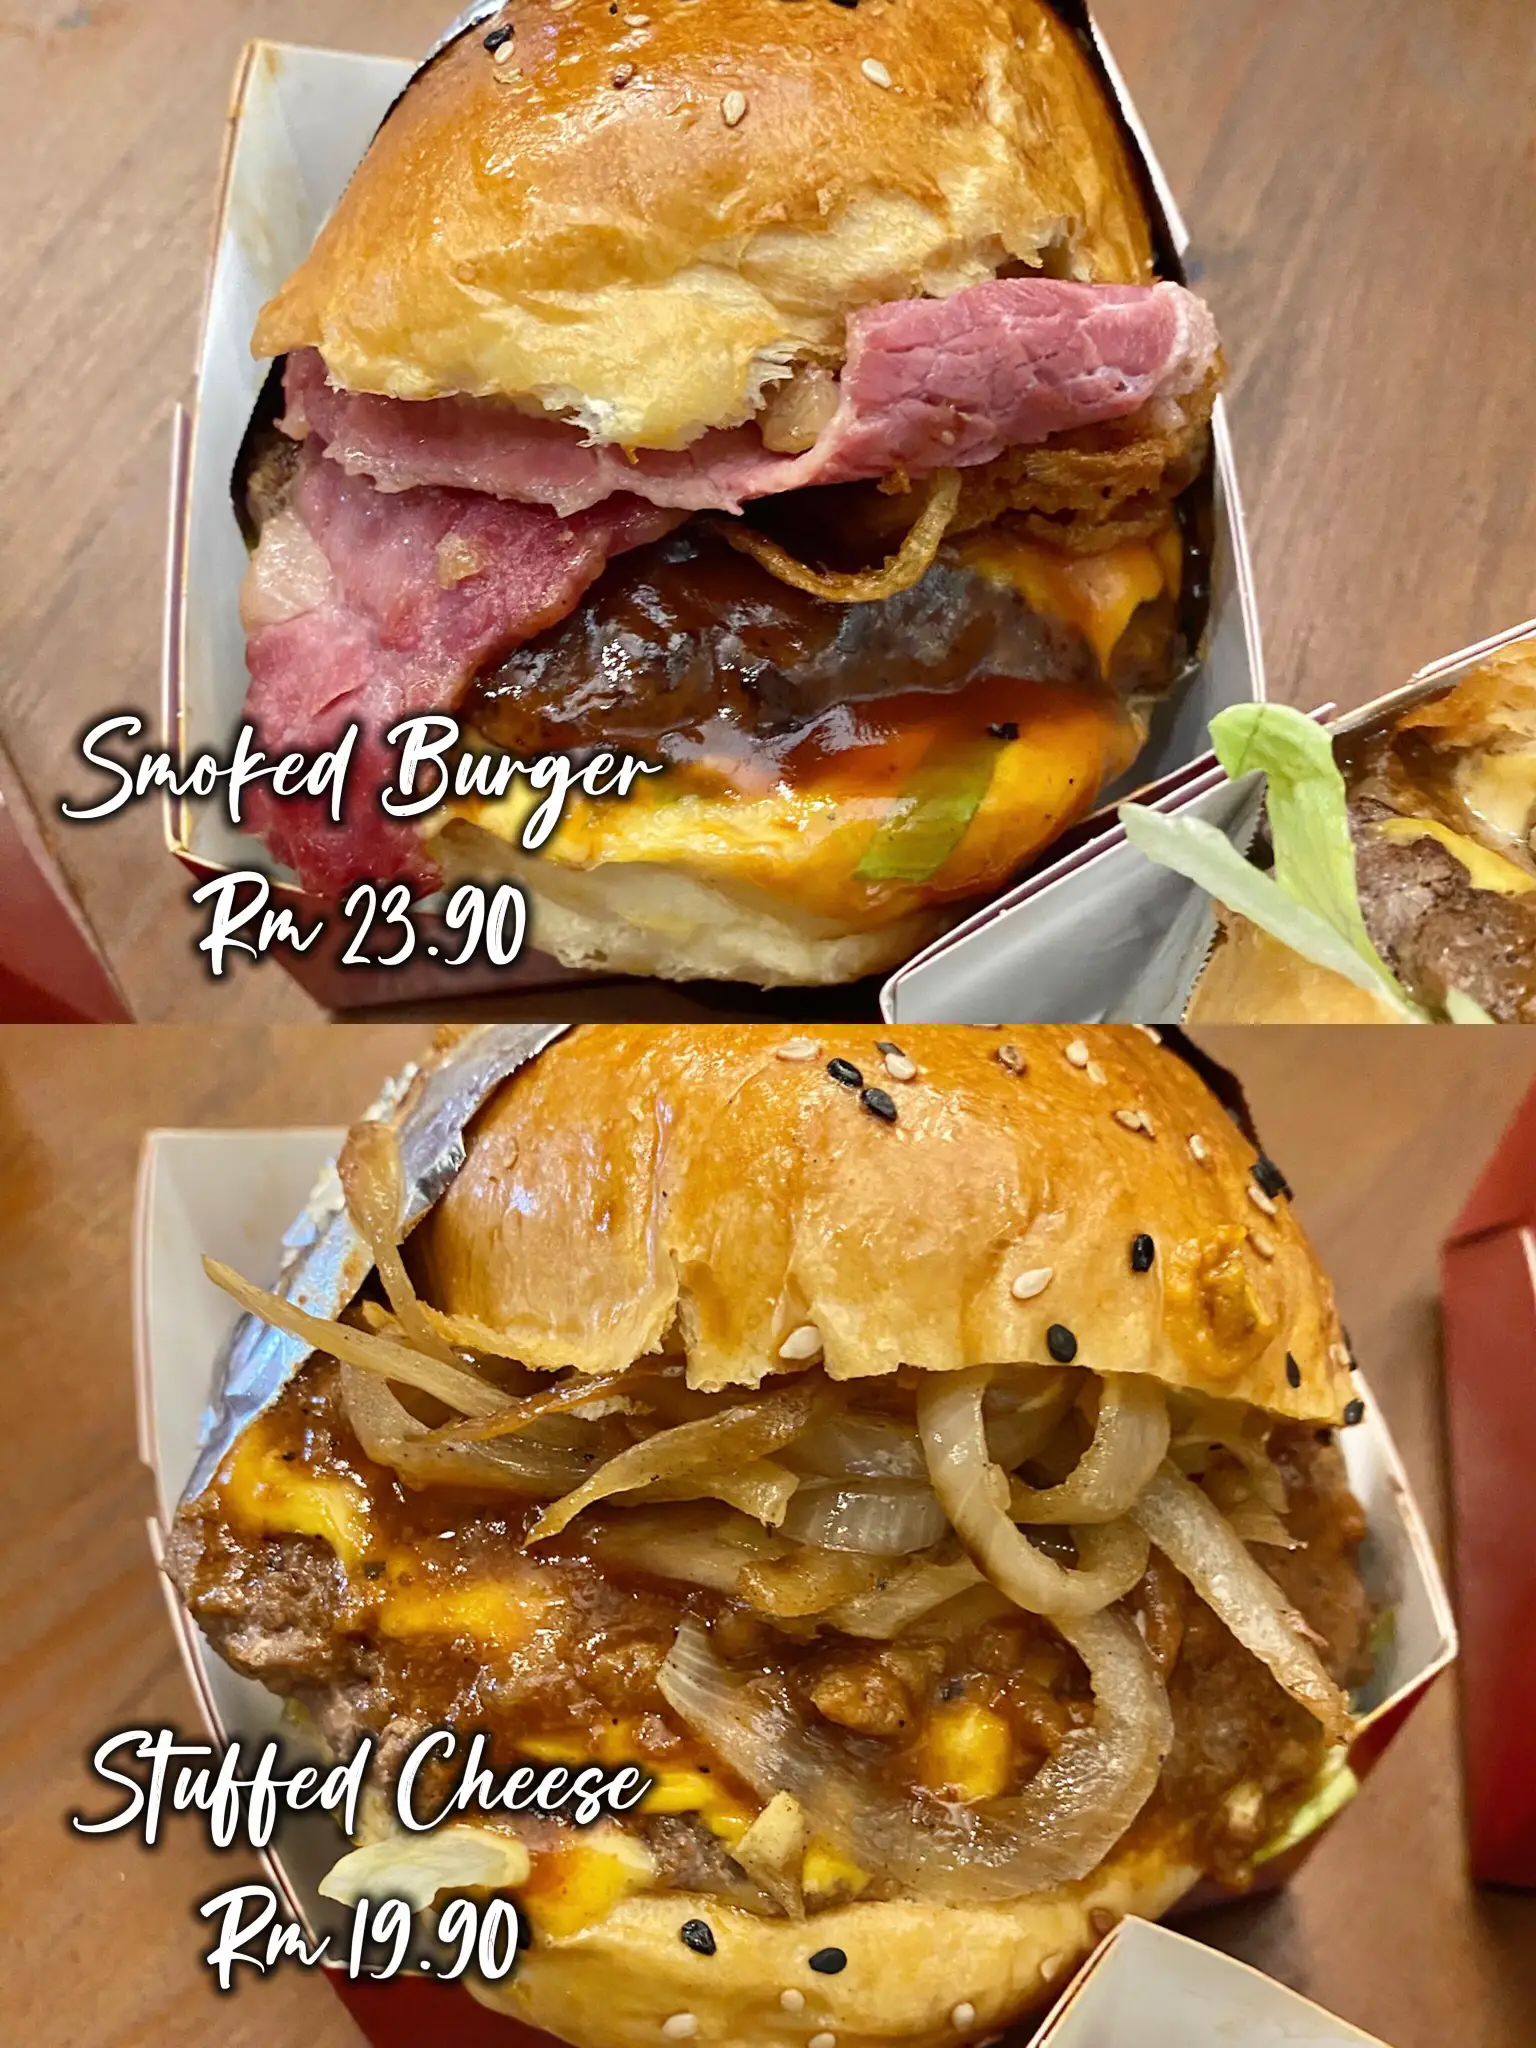 Imej Woodfire is the best burger shop!(1)